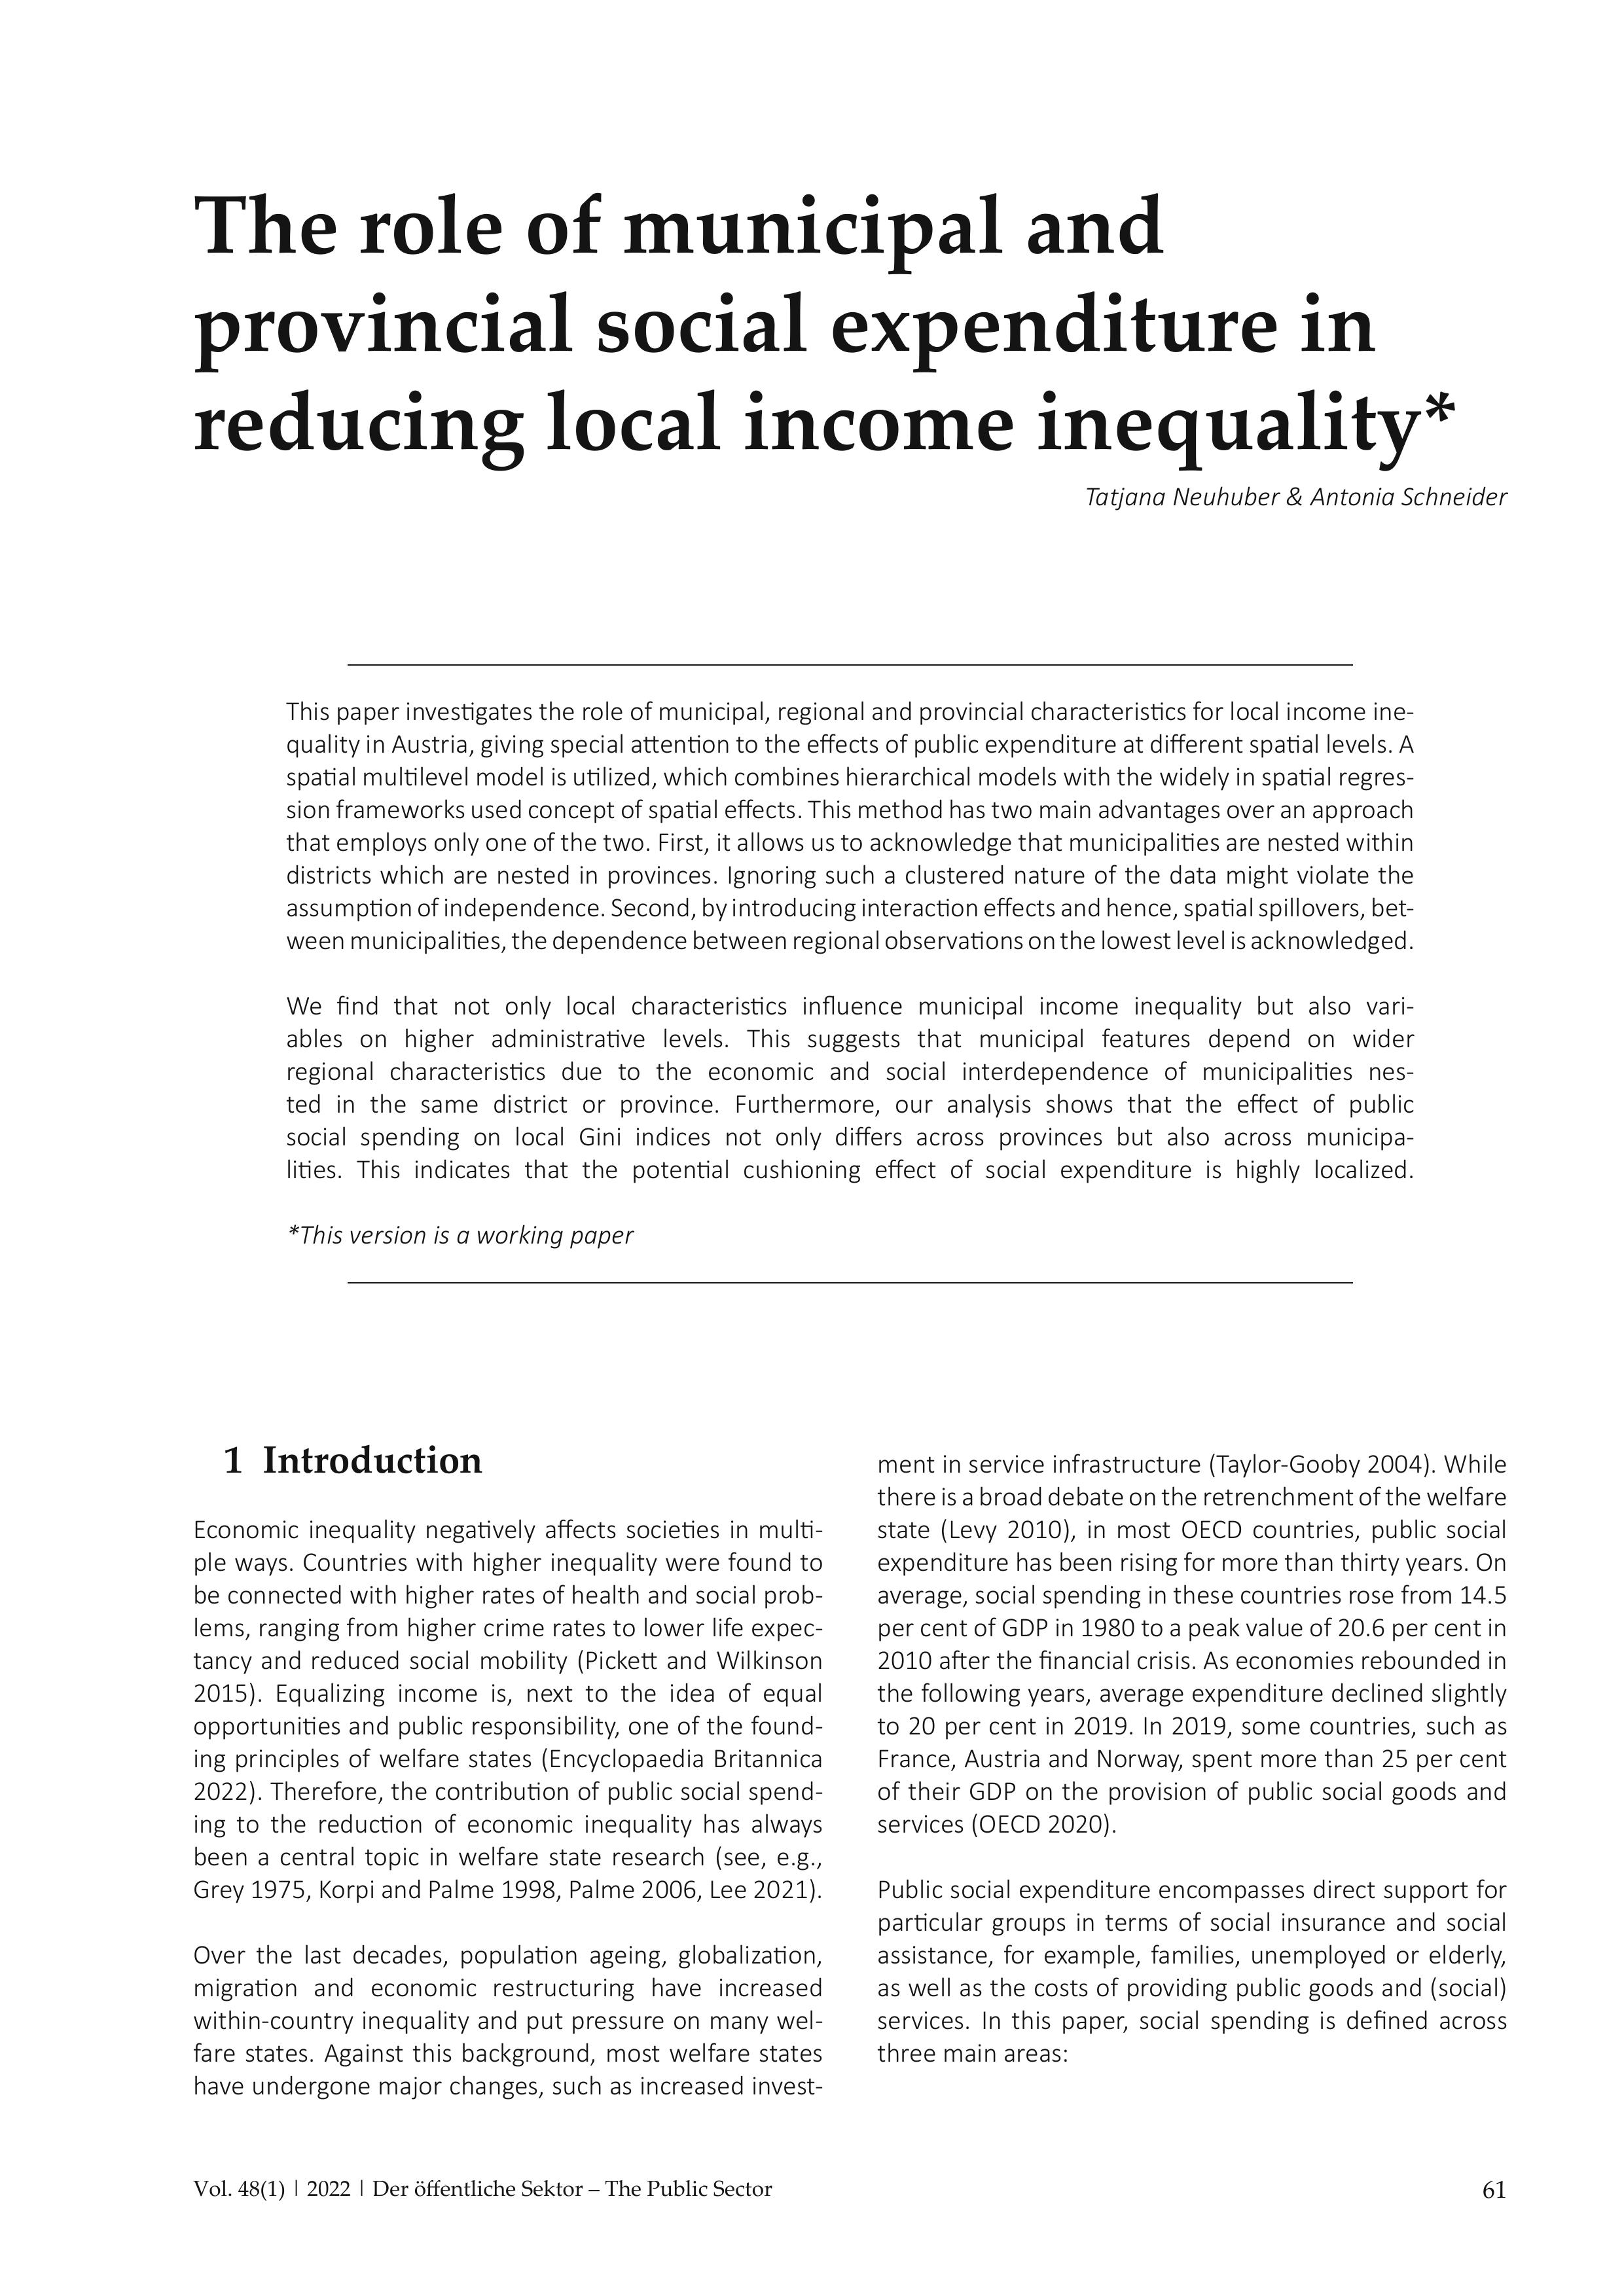 The role of municipal and provincial social expenditure in reducing local income inequality